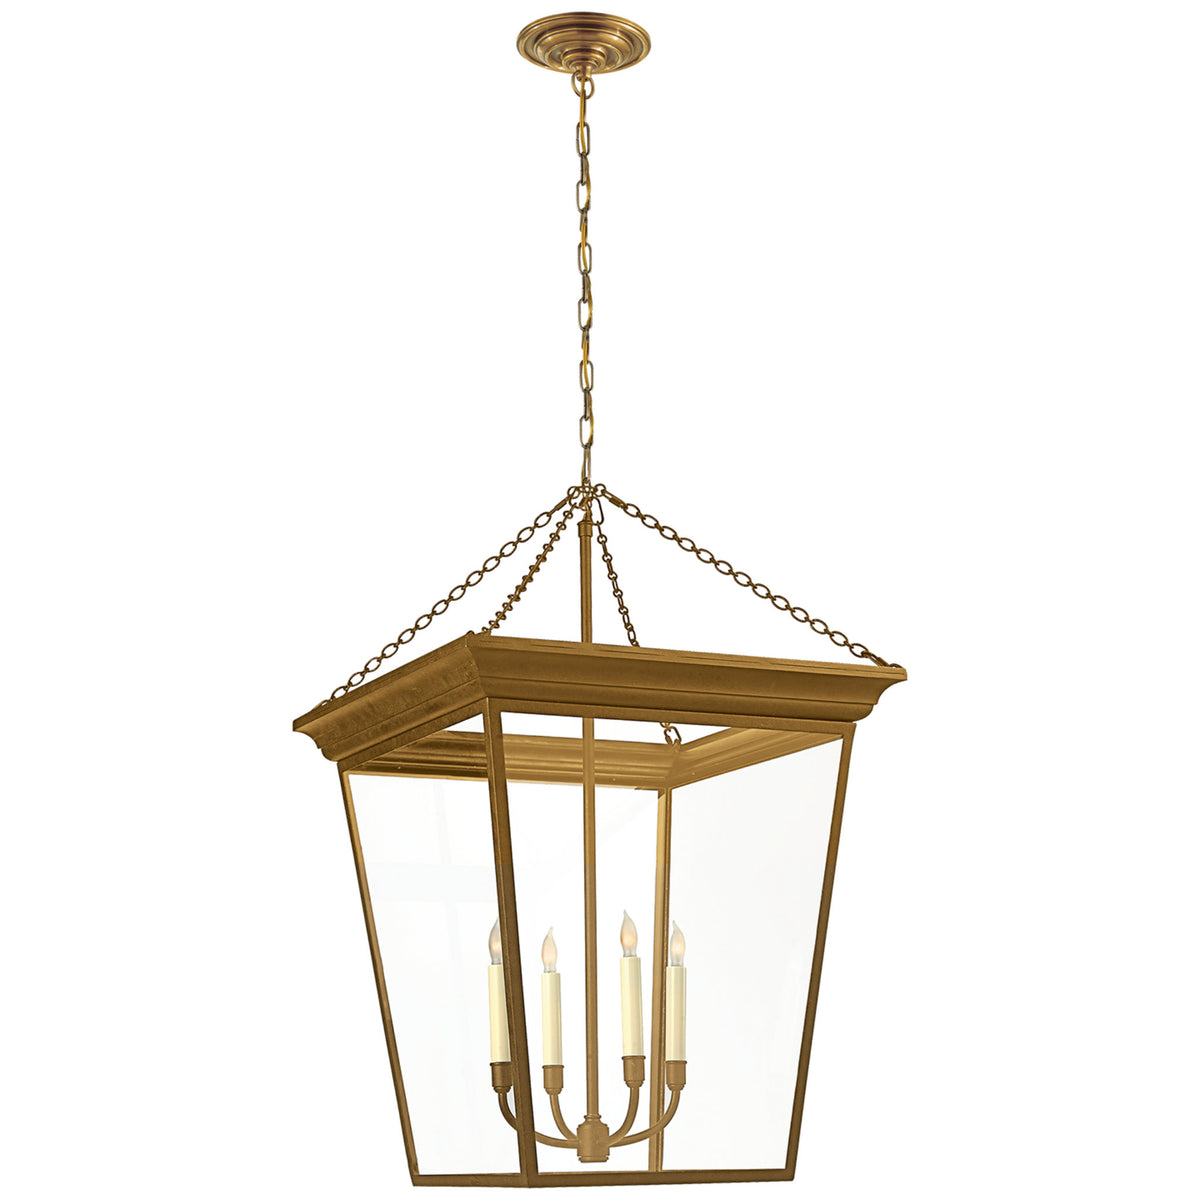 Chapman & Myers Riverside Lantern in Antique Brass by Visual Comfort  Signature at Destination Lighting